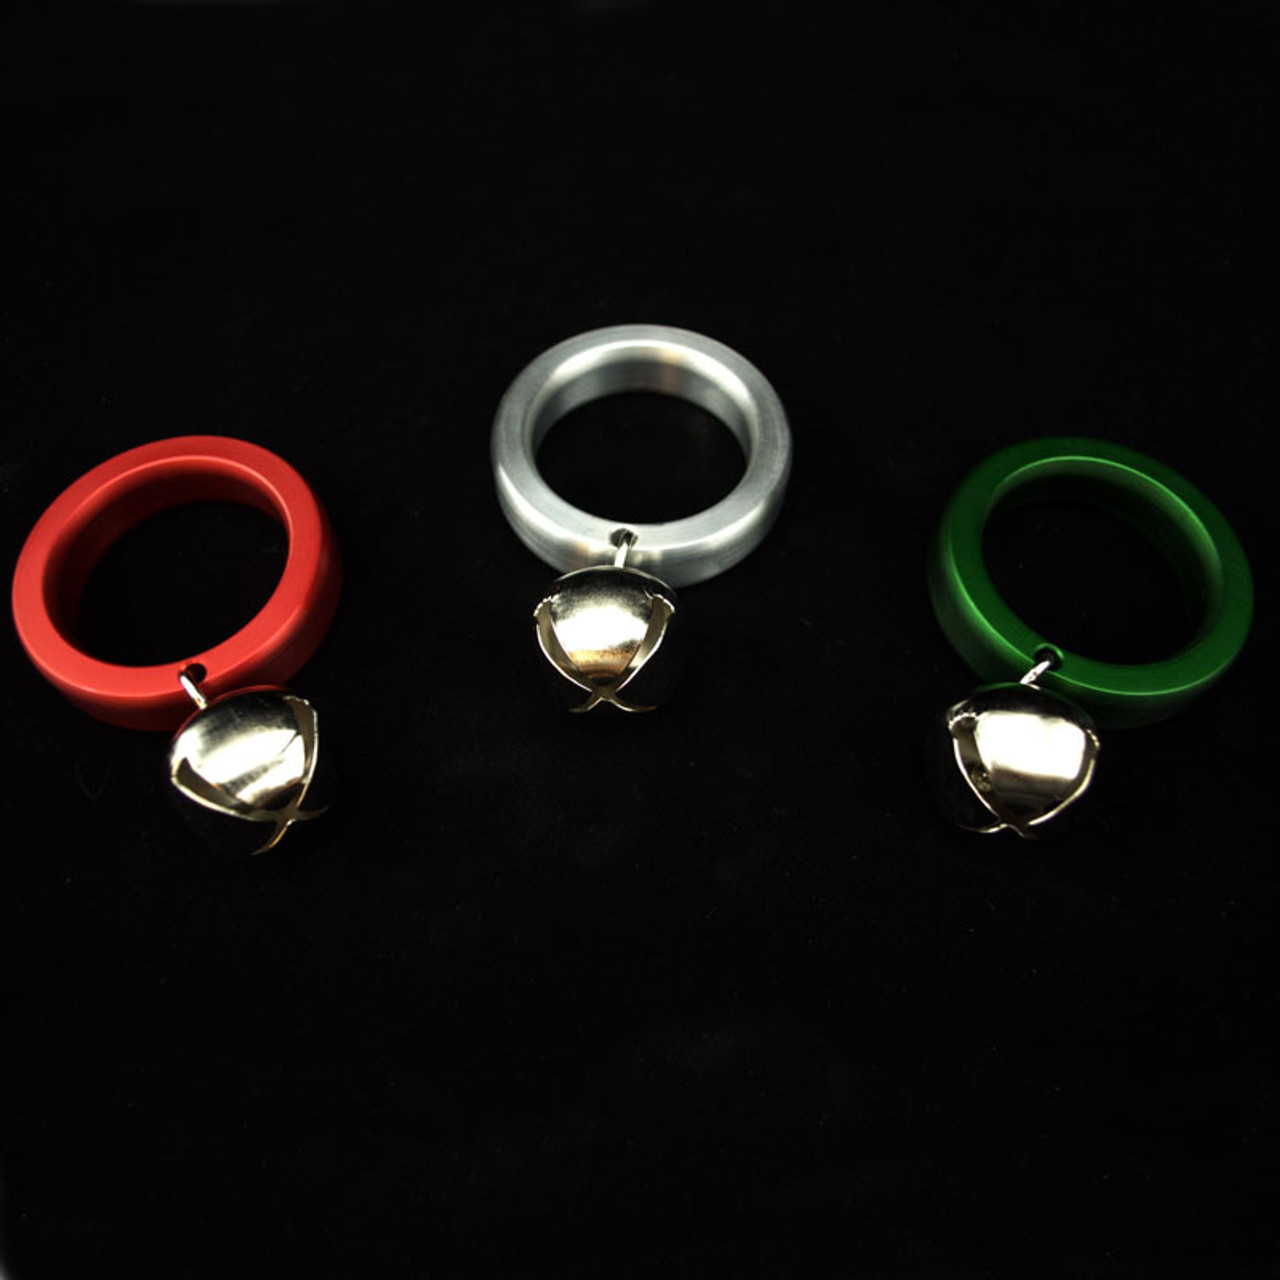 Ring My Bell Cock Ring Set